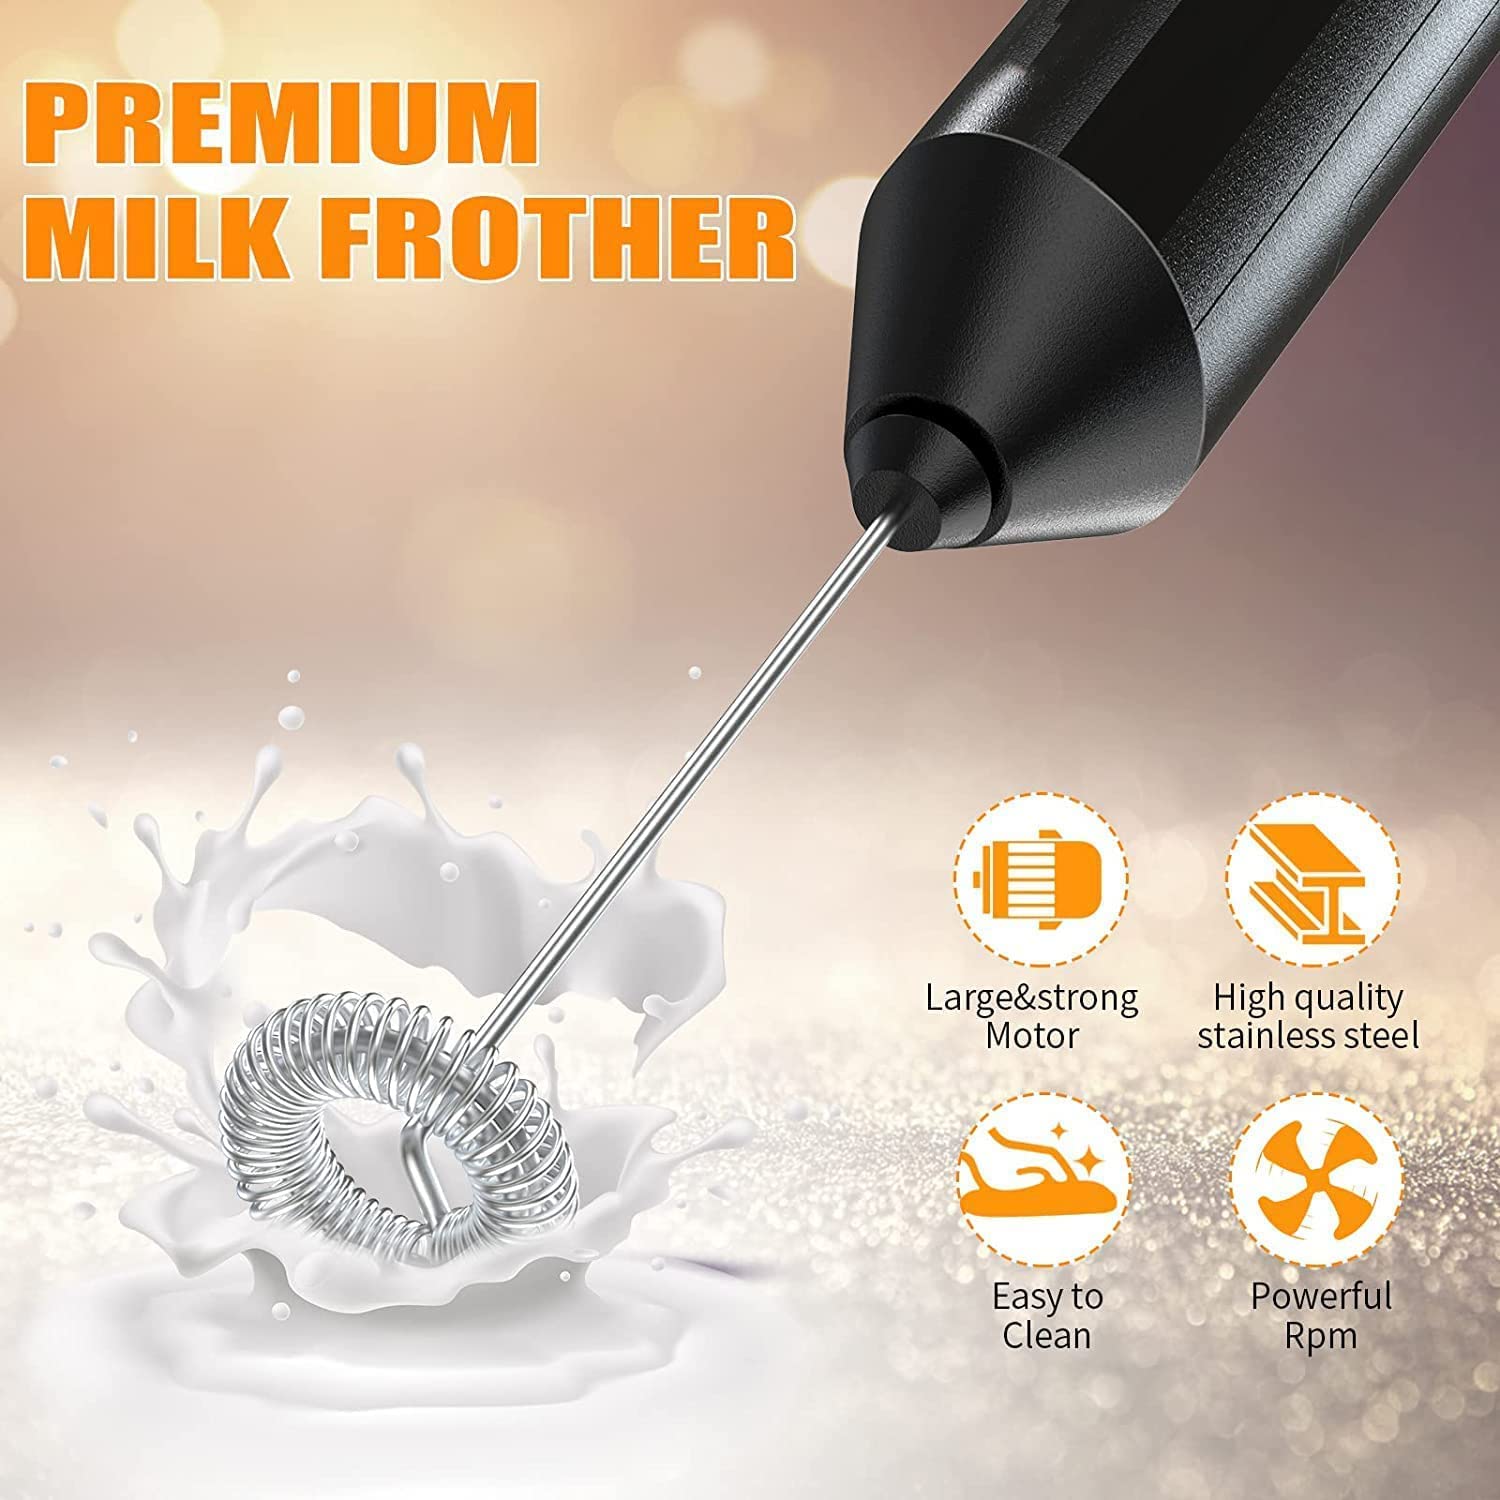 VIO Electric Milk Frother Handheld with High Motor, Mixer with Food Grade Stainless Steel Stirring Head, for Latte, Cappuccino,Drinks,Hot Chocolate. (Black)